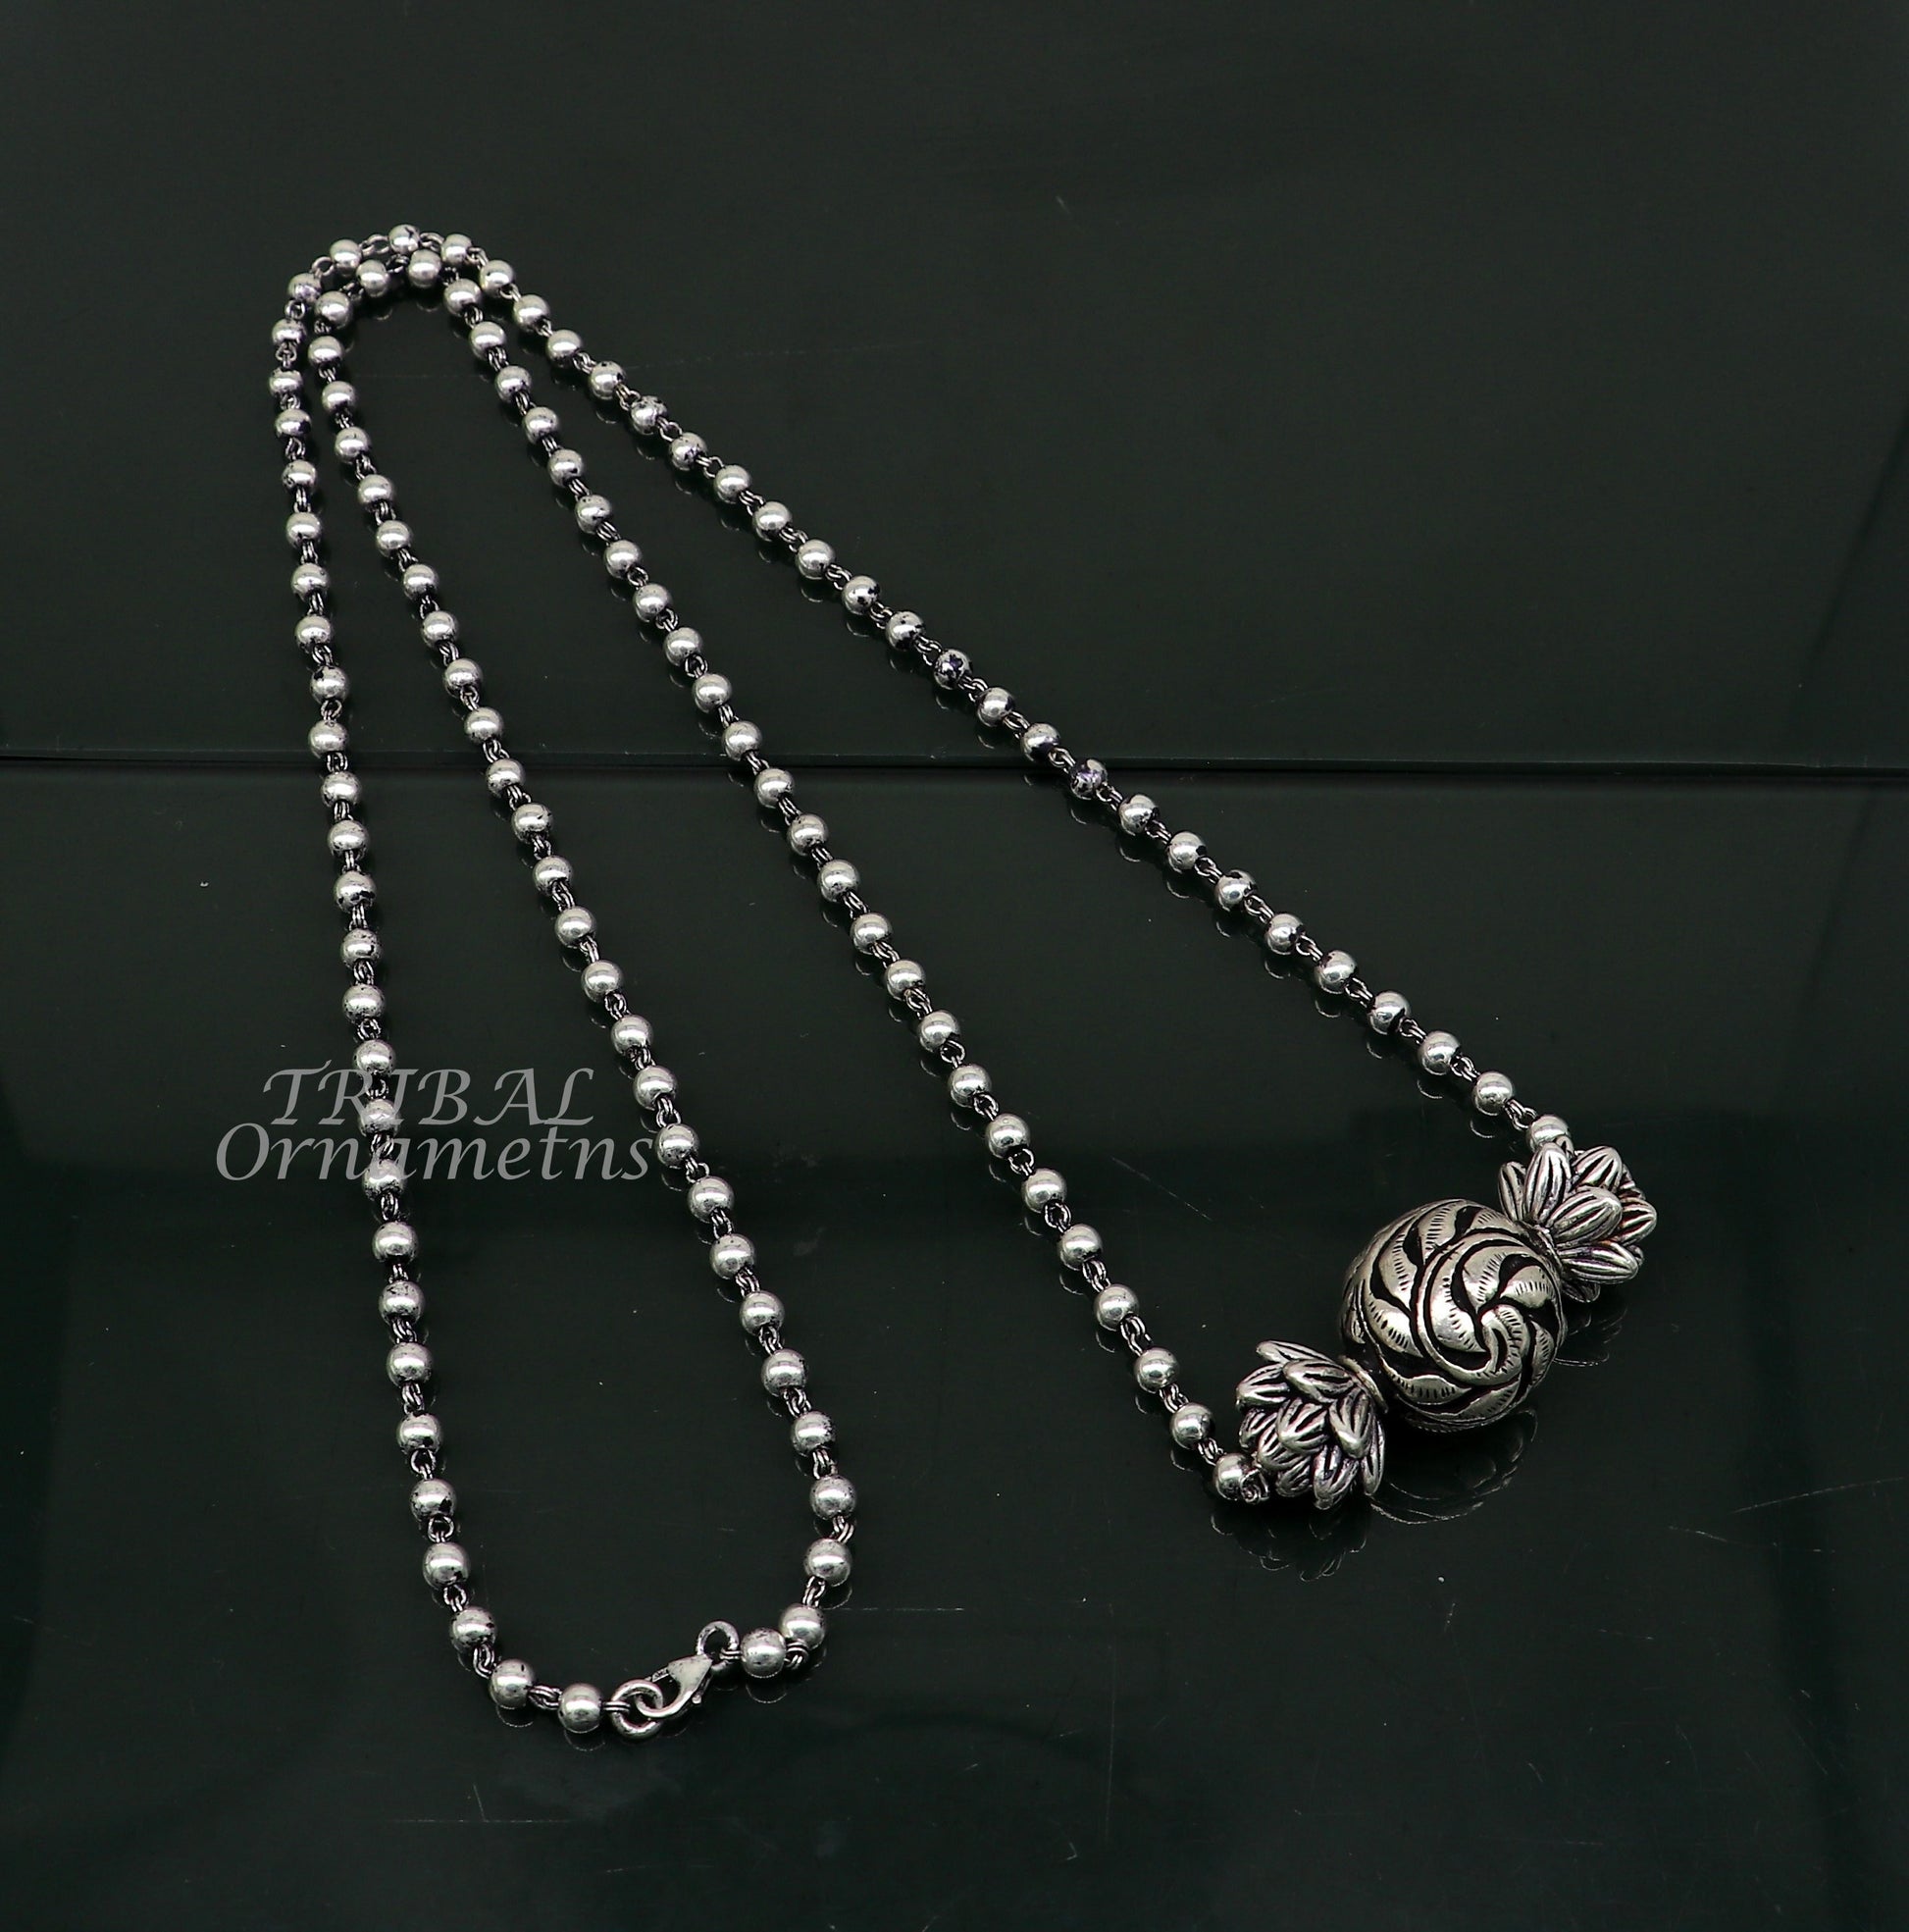 925 sterling silver handmade 4mm beads long necklace, unique ball design pendant traditional cultural functional necklace jewelry  SET535 - TRIBAL ORNAMENTS